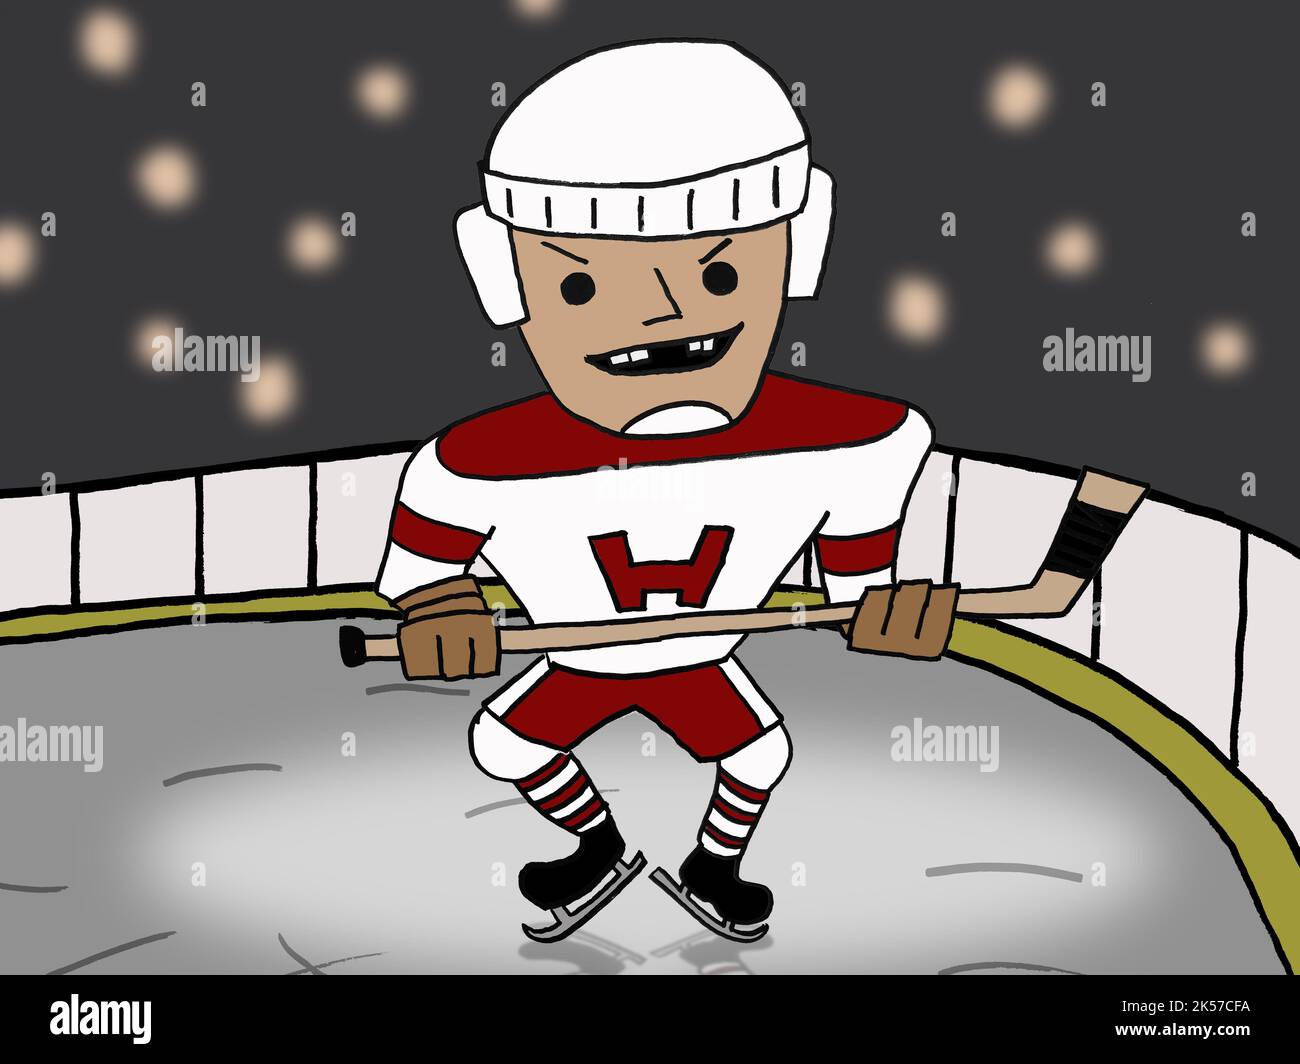 A cartoon hockey player smiles a missing-tooth grin from the rink. Stock Photo